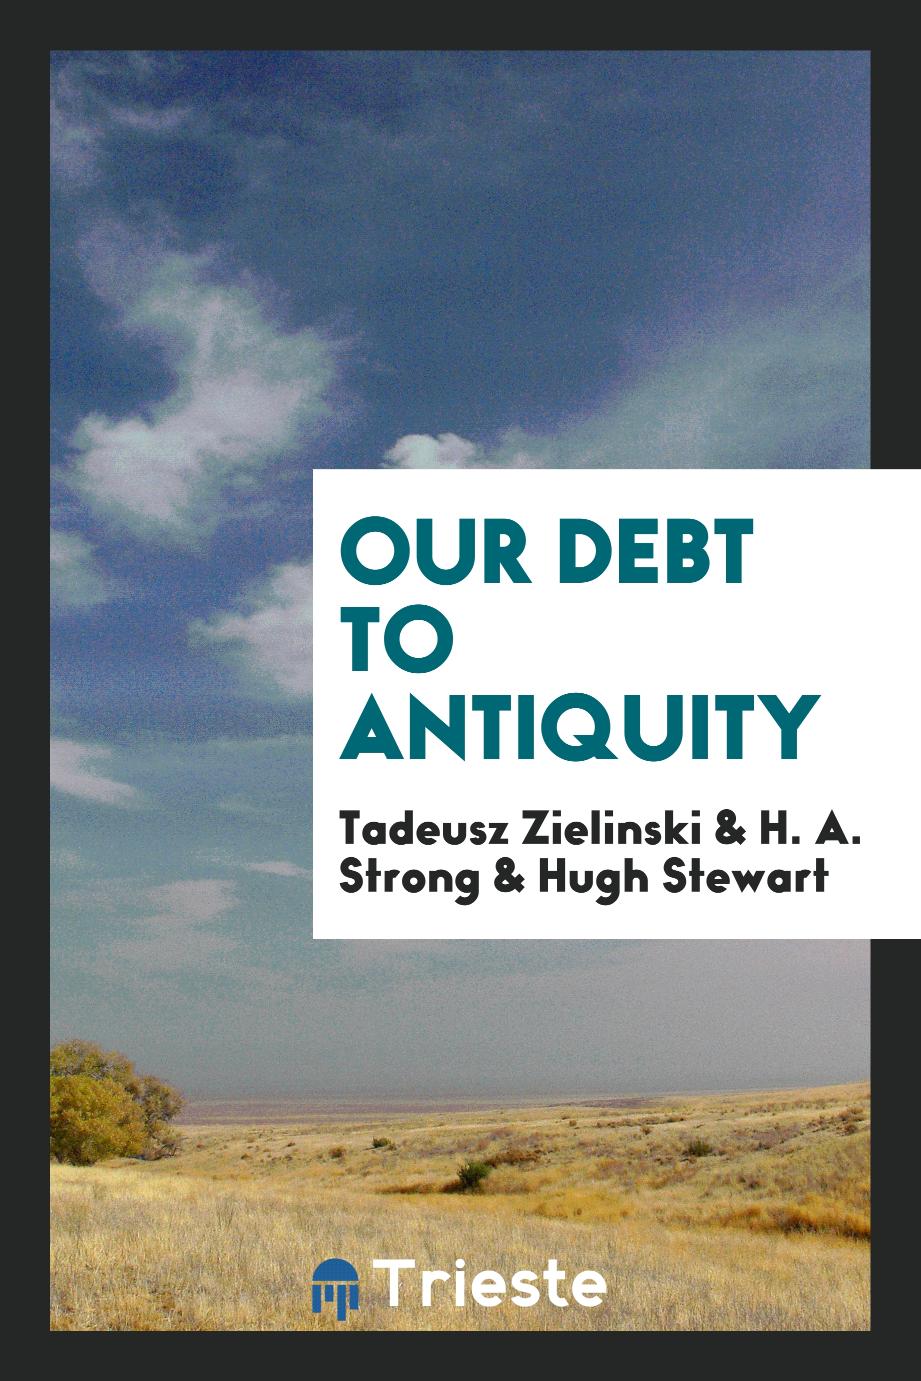 Our debt to antiquity